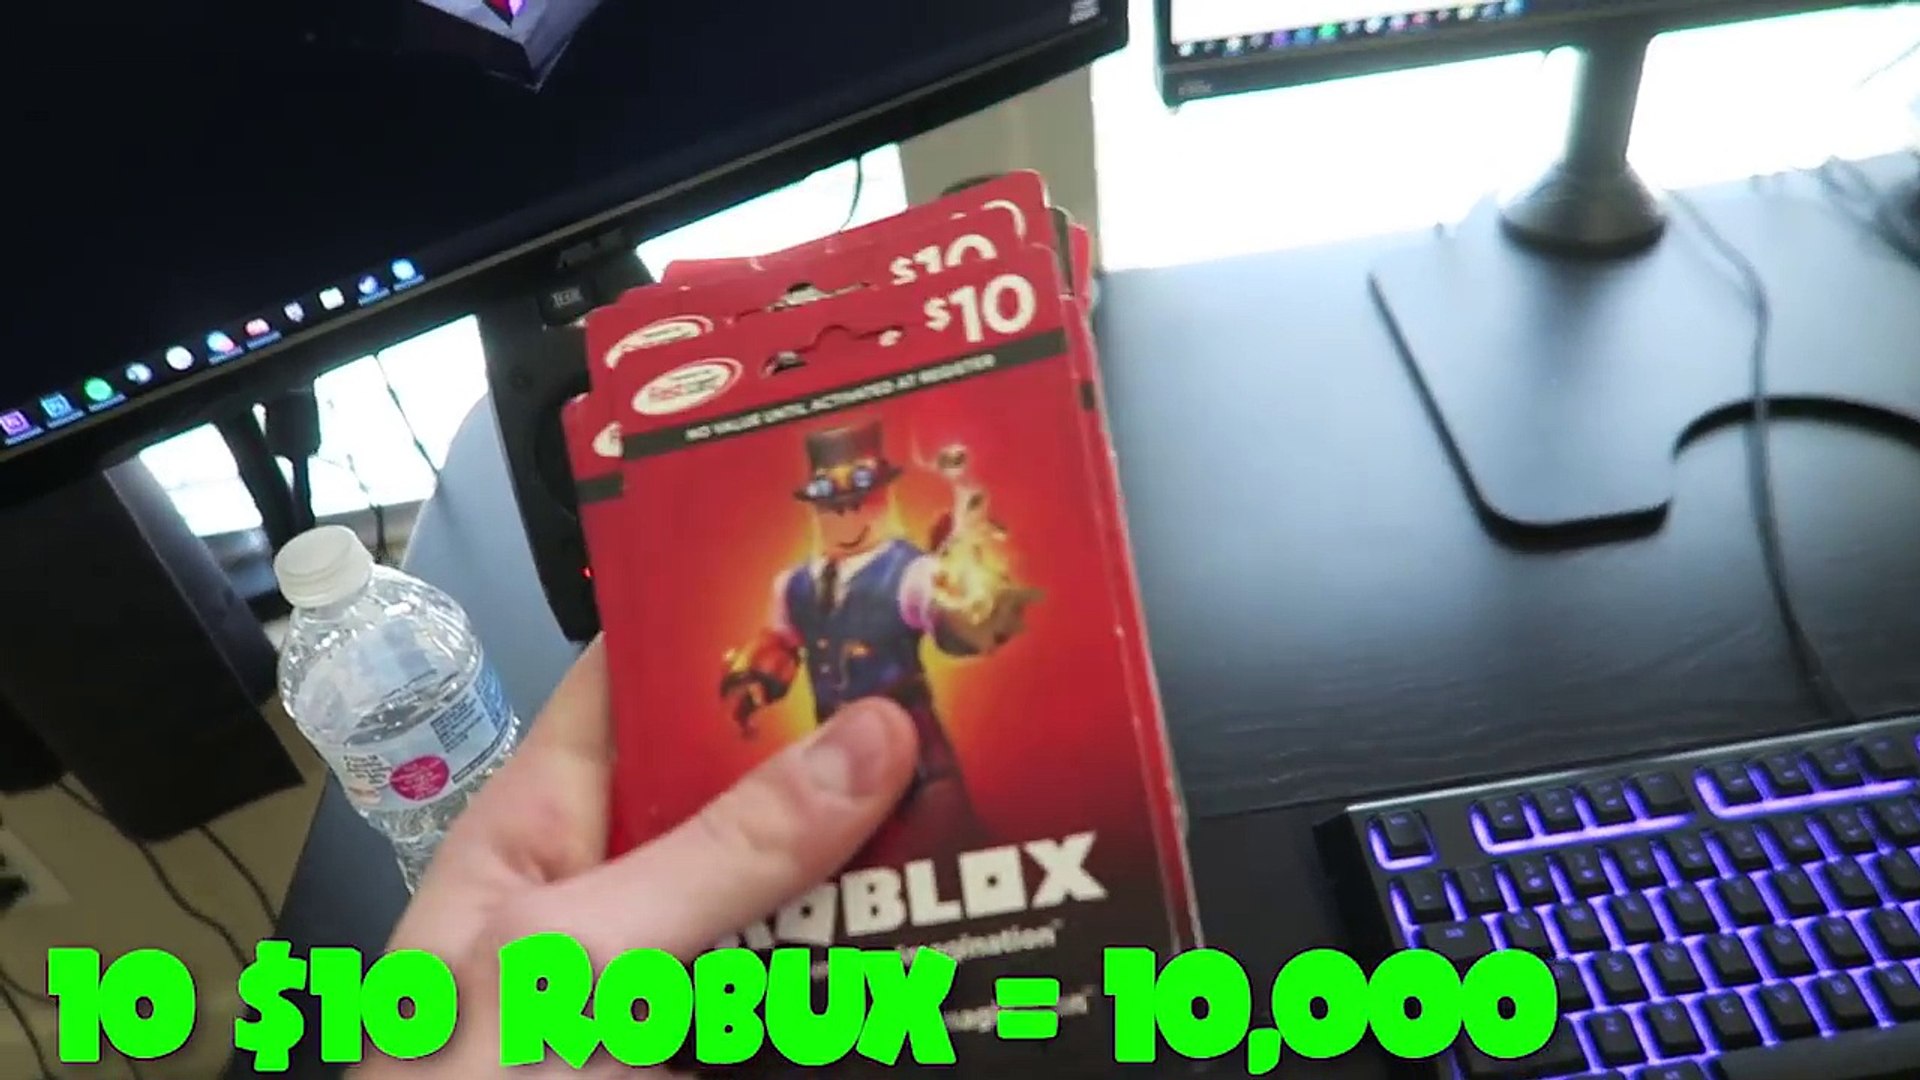 Stealing My Roommates Robux 500 Worth - how to get 500 billion robux hack 2017 roblox accounts for